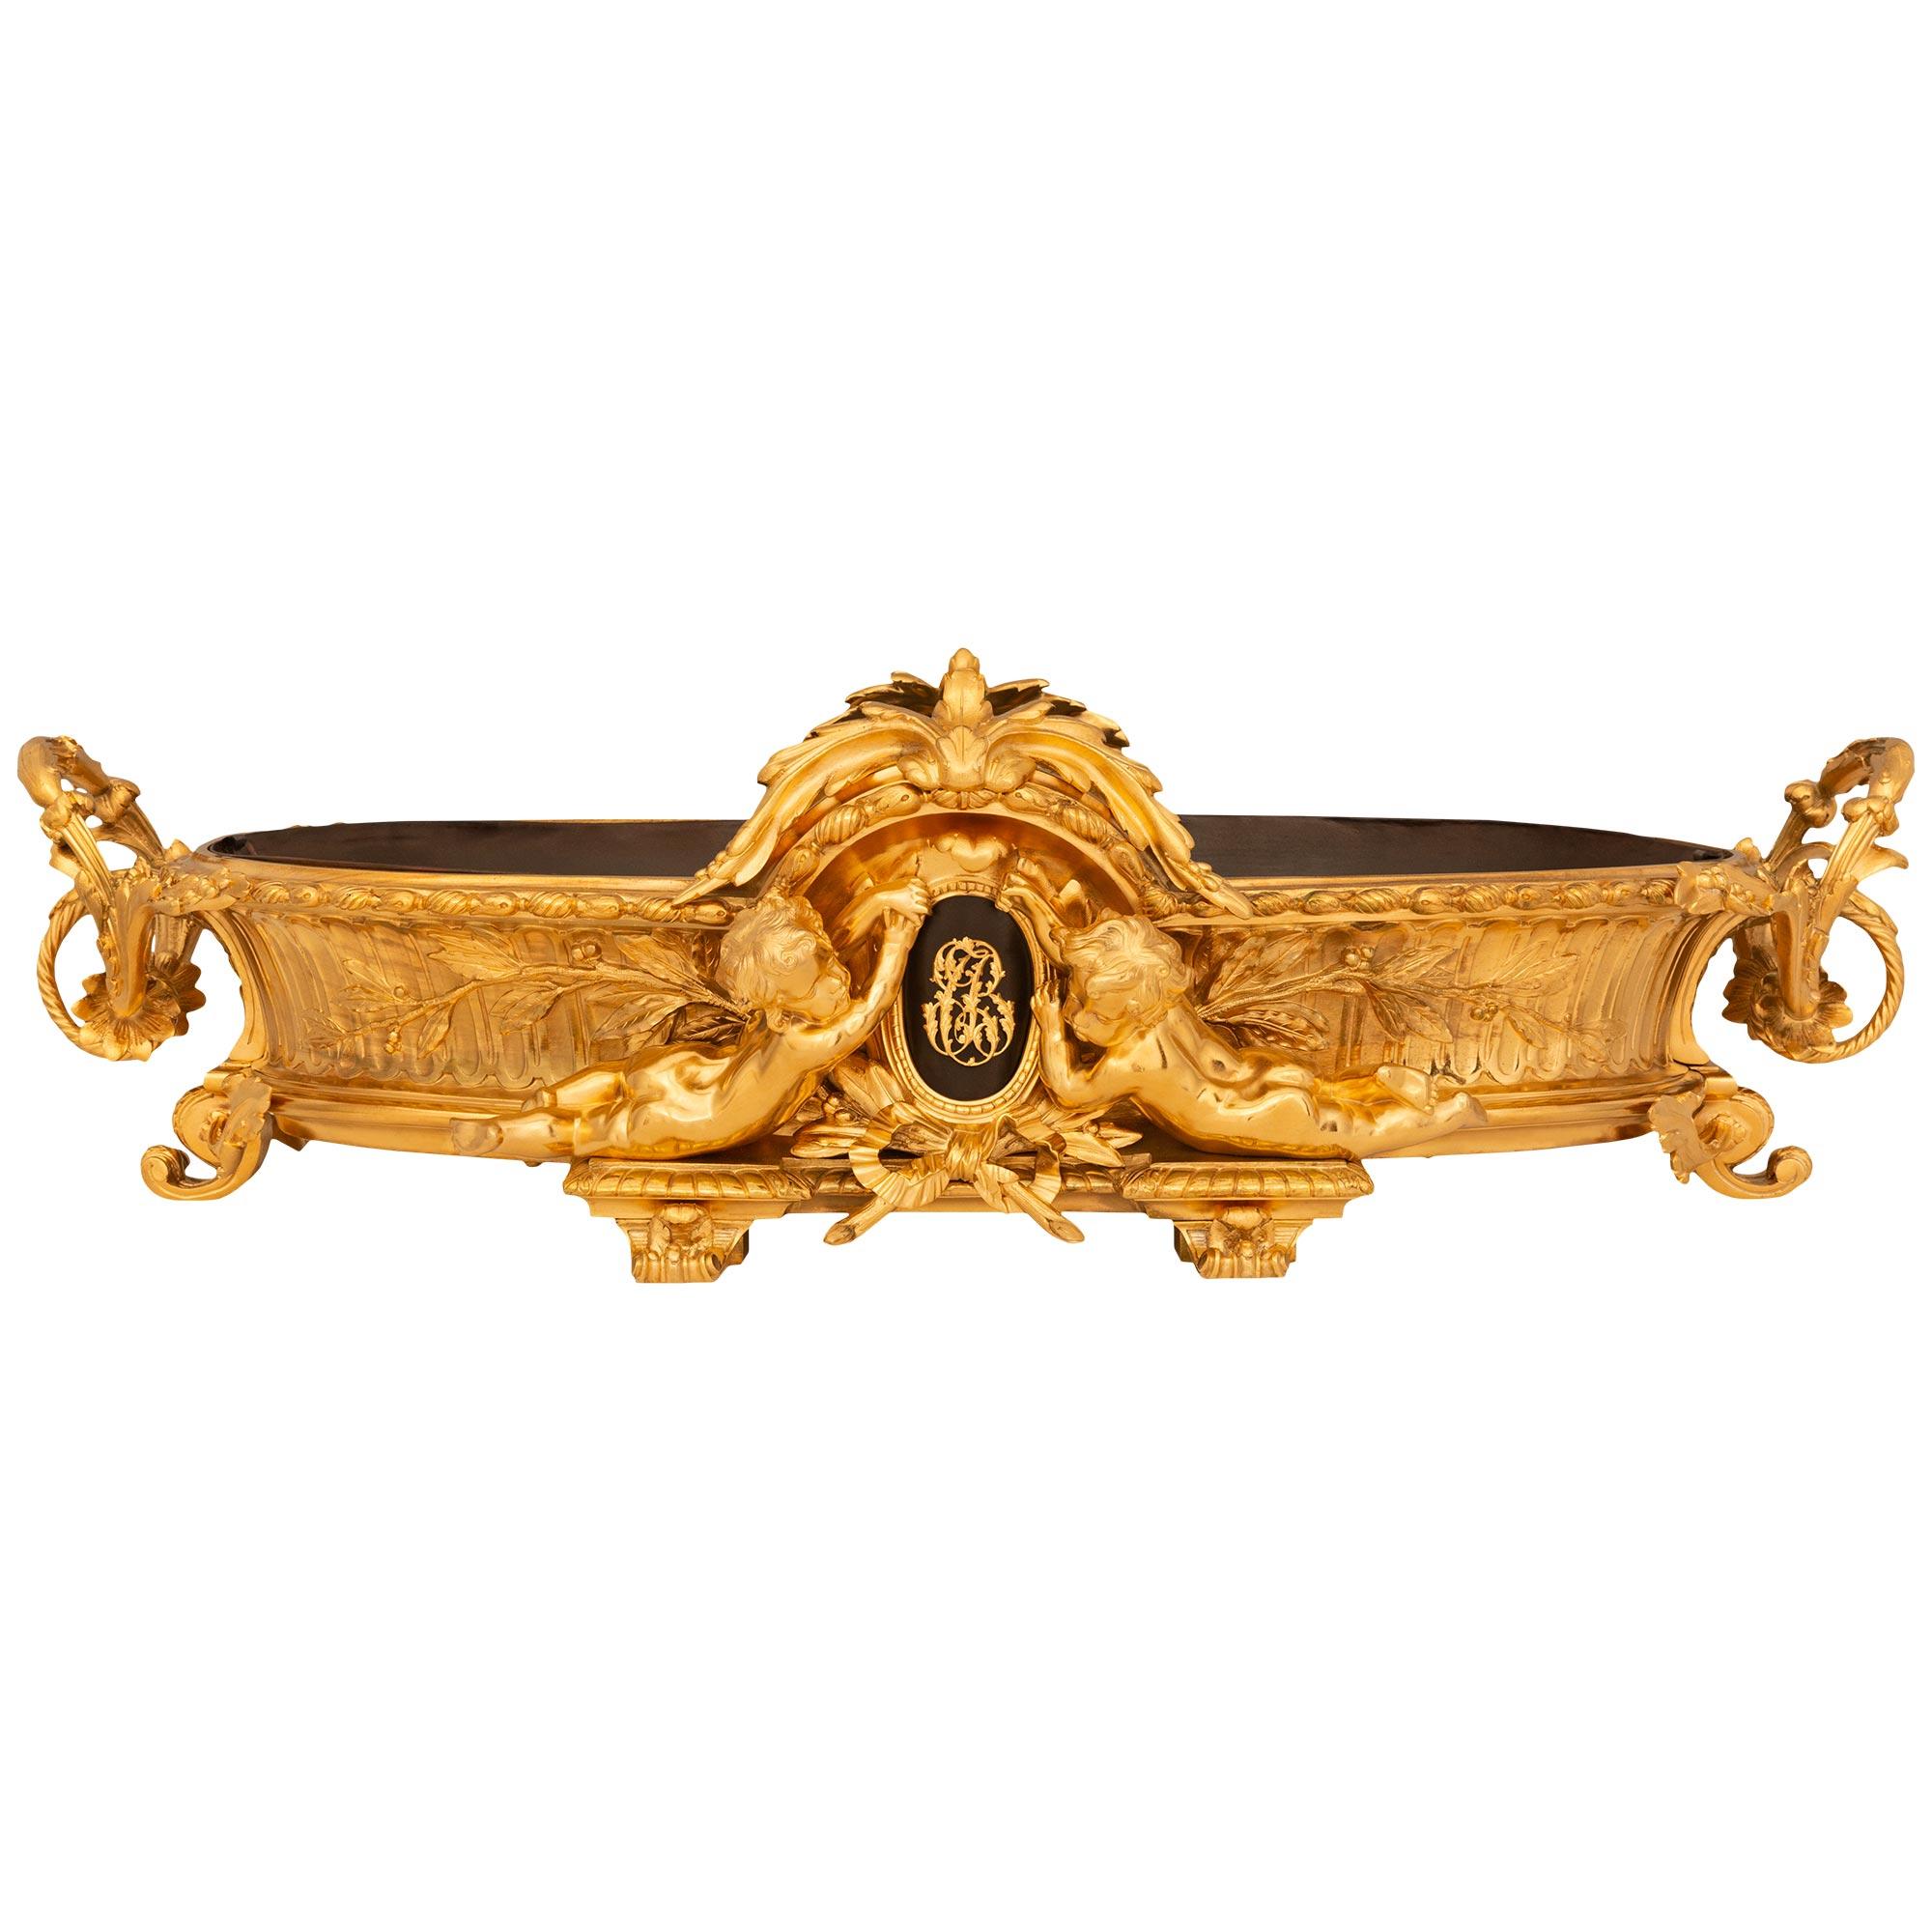 French 19th c. Napoleon III Period Ormolu, Patinated Bronze, & Tole Centerpiece For Sale 4